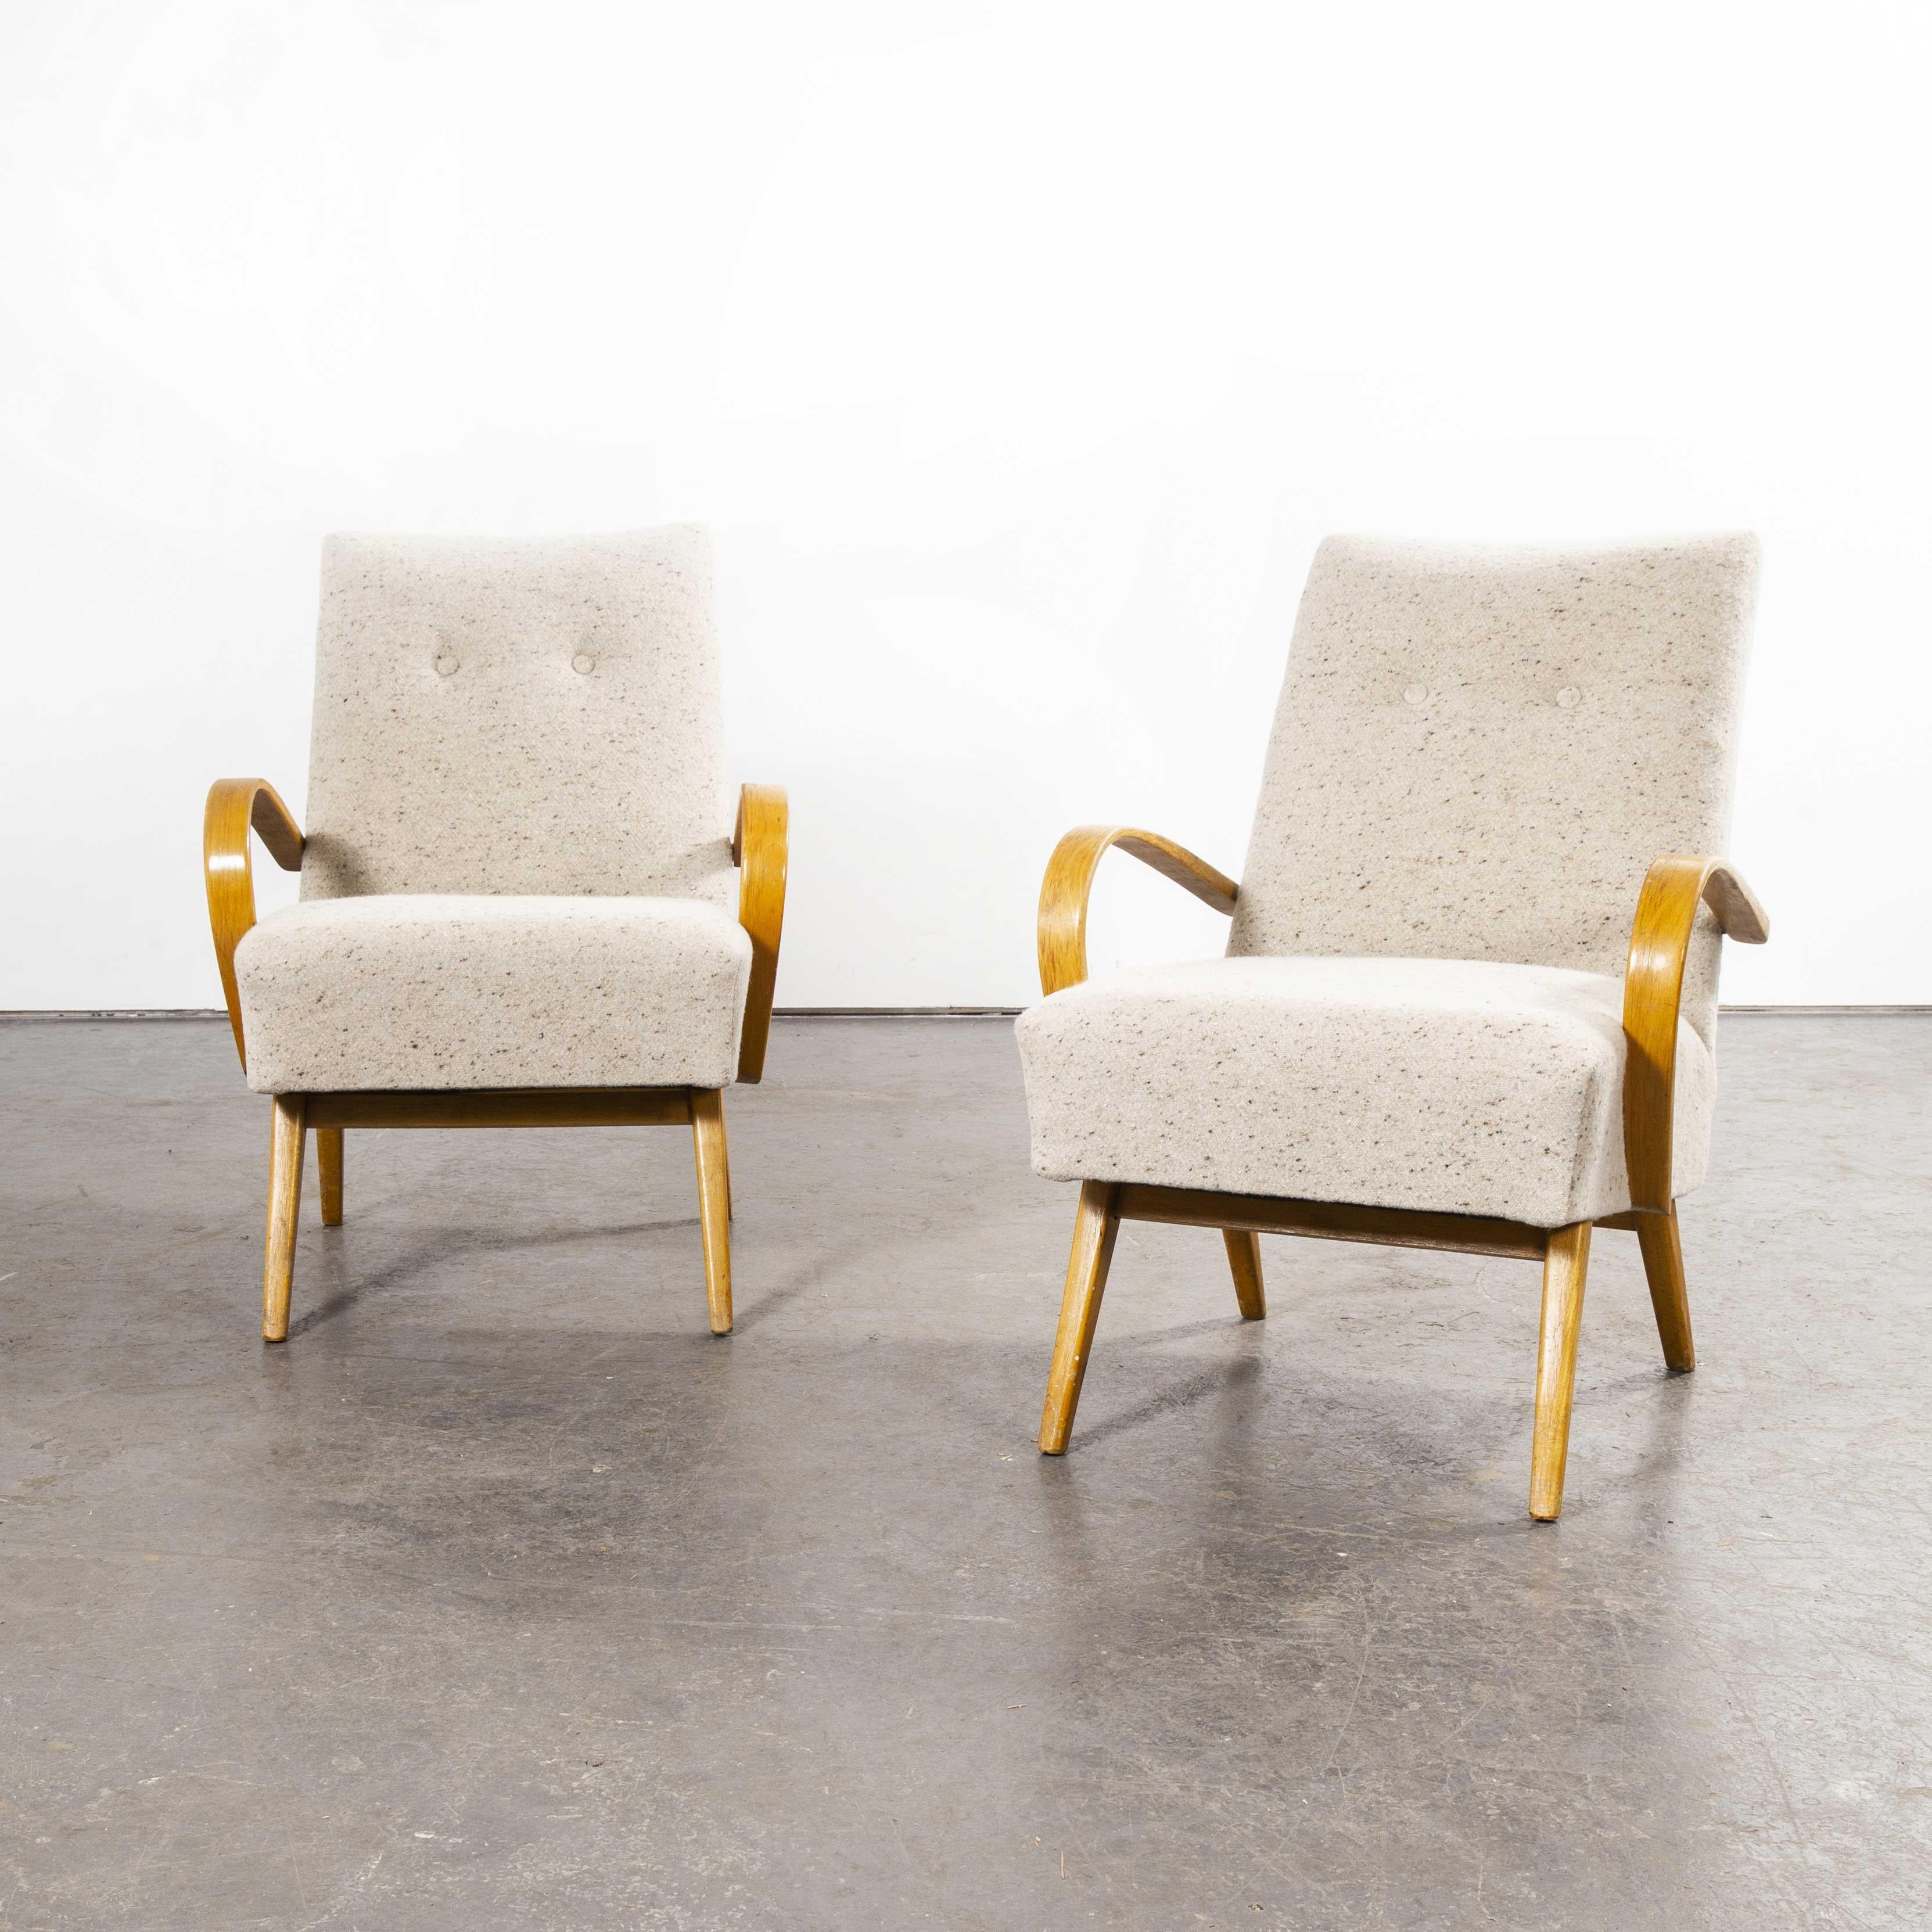 Czech 1950s Pair of Boucle Wool Upholstered Armchairs, Jindrich Halabala